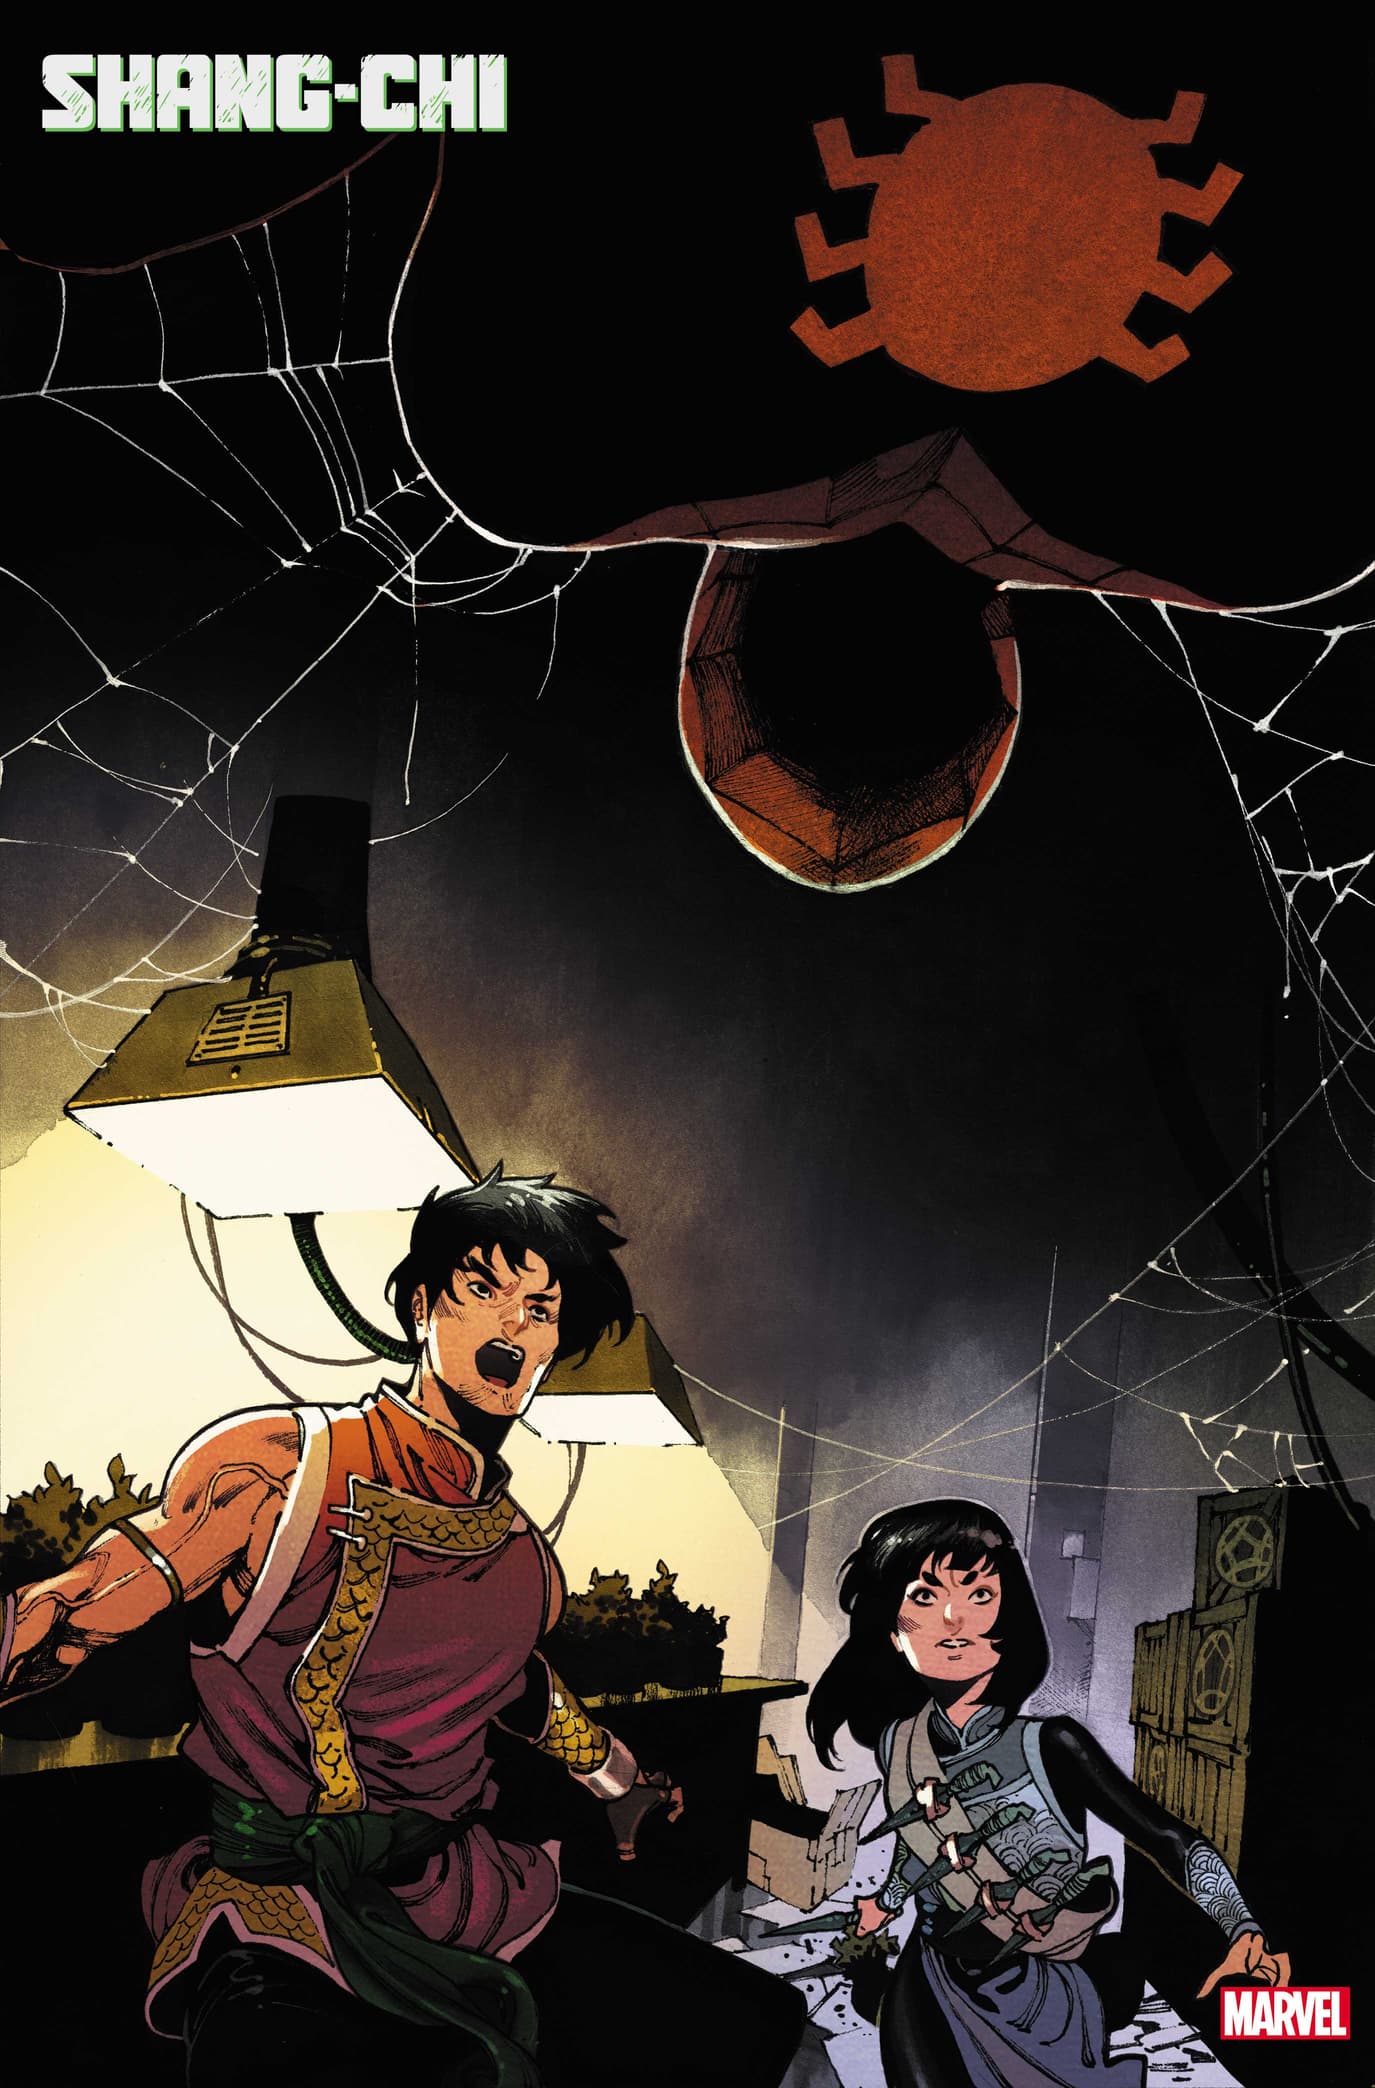 SHANG-CHI (2021) #1 interior art by Dike Ruan with colors by Tríona Farrell